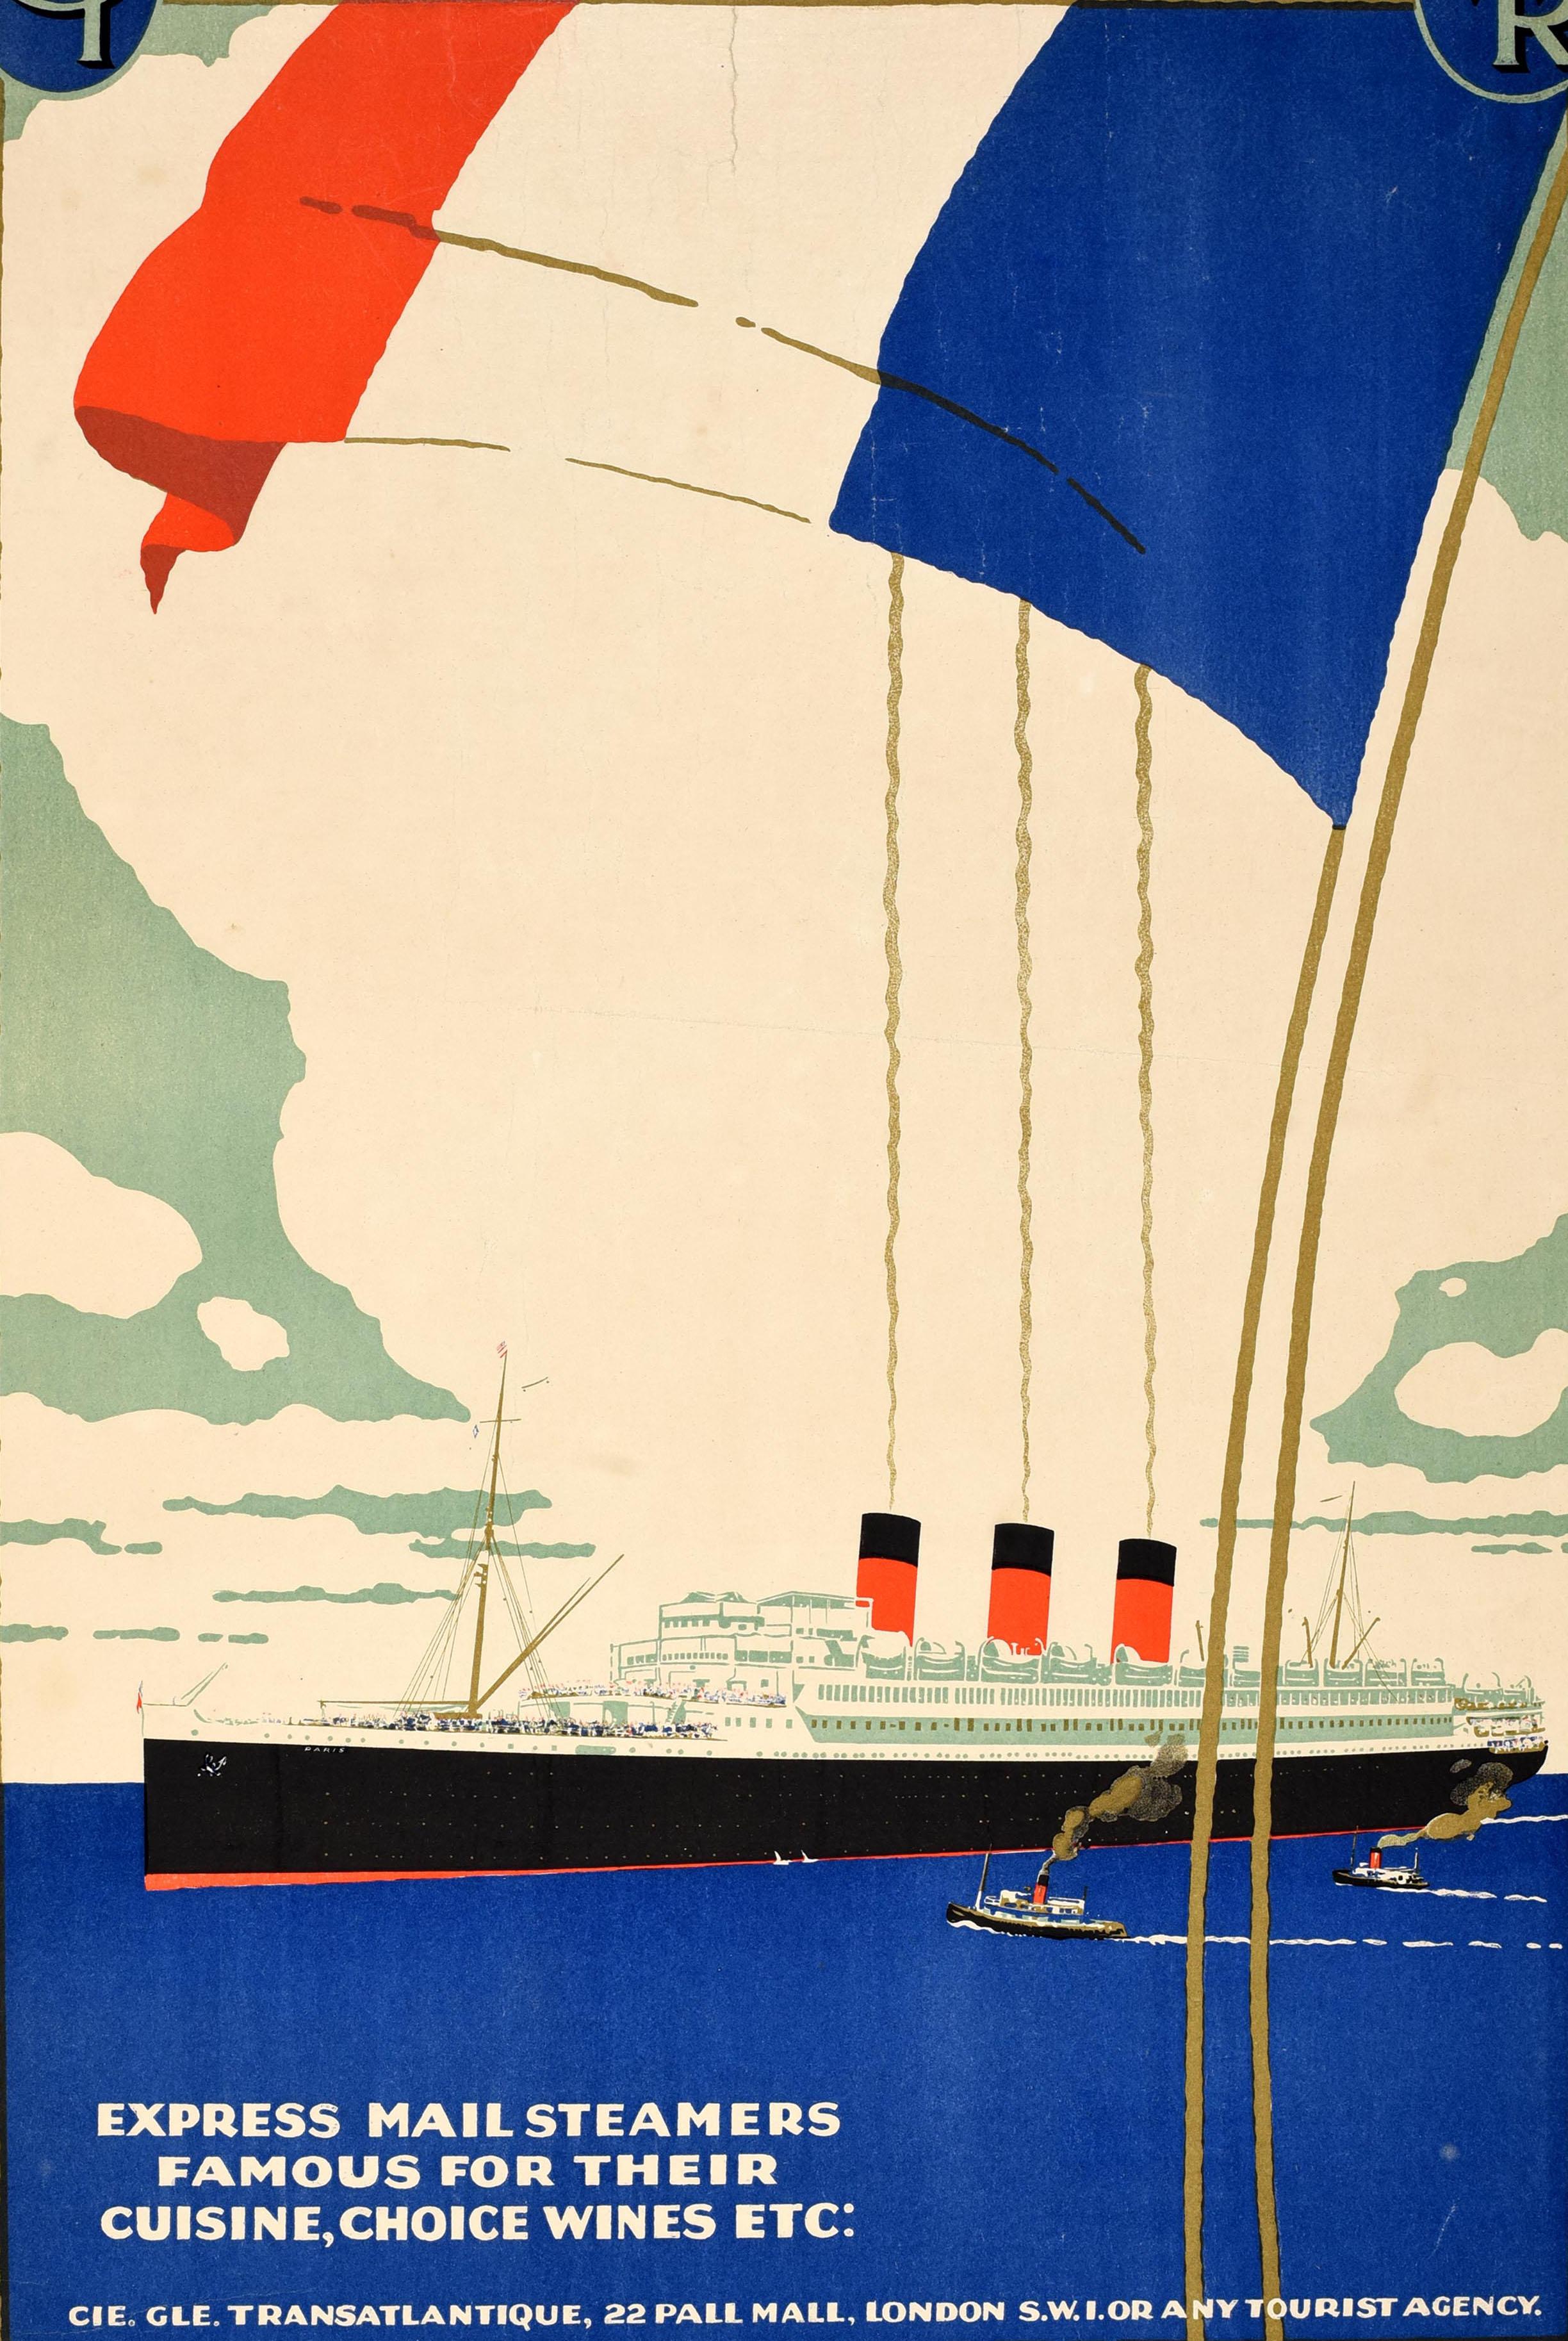 Original vintage cruise travel poster advertising Plymouth New York issued by Compagnie Generale Transatlantique French Line CGT. Elegant Art Deco design featuring an ocean liner ship sailing at sea with small tug boats on the calm blue water and a